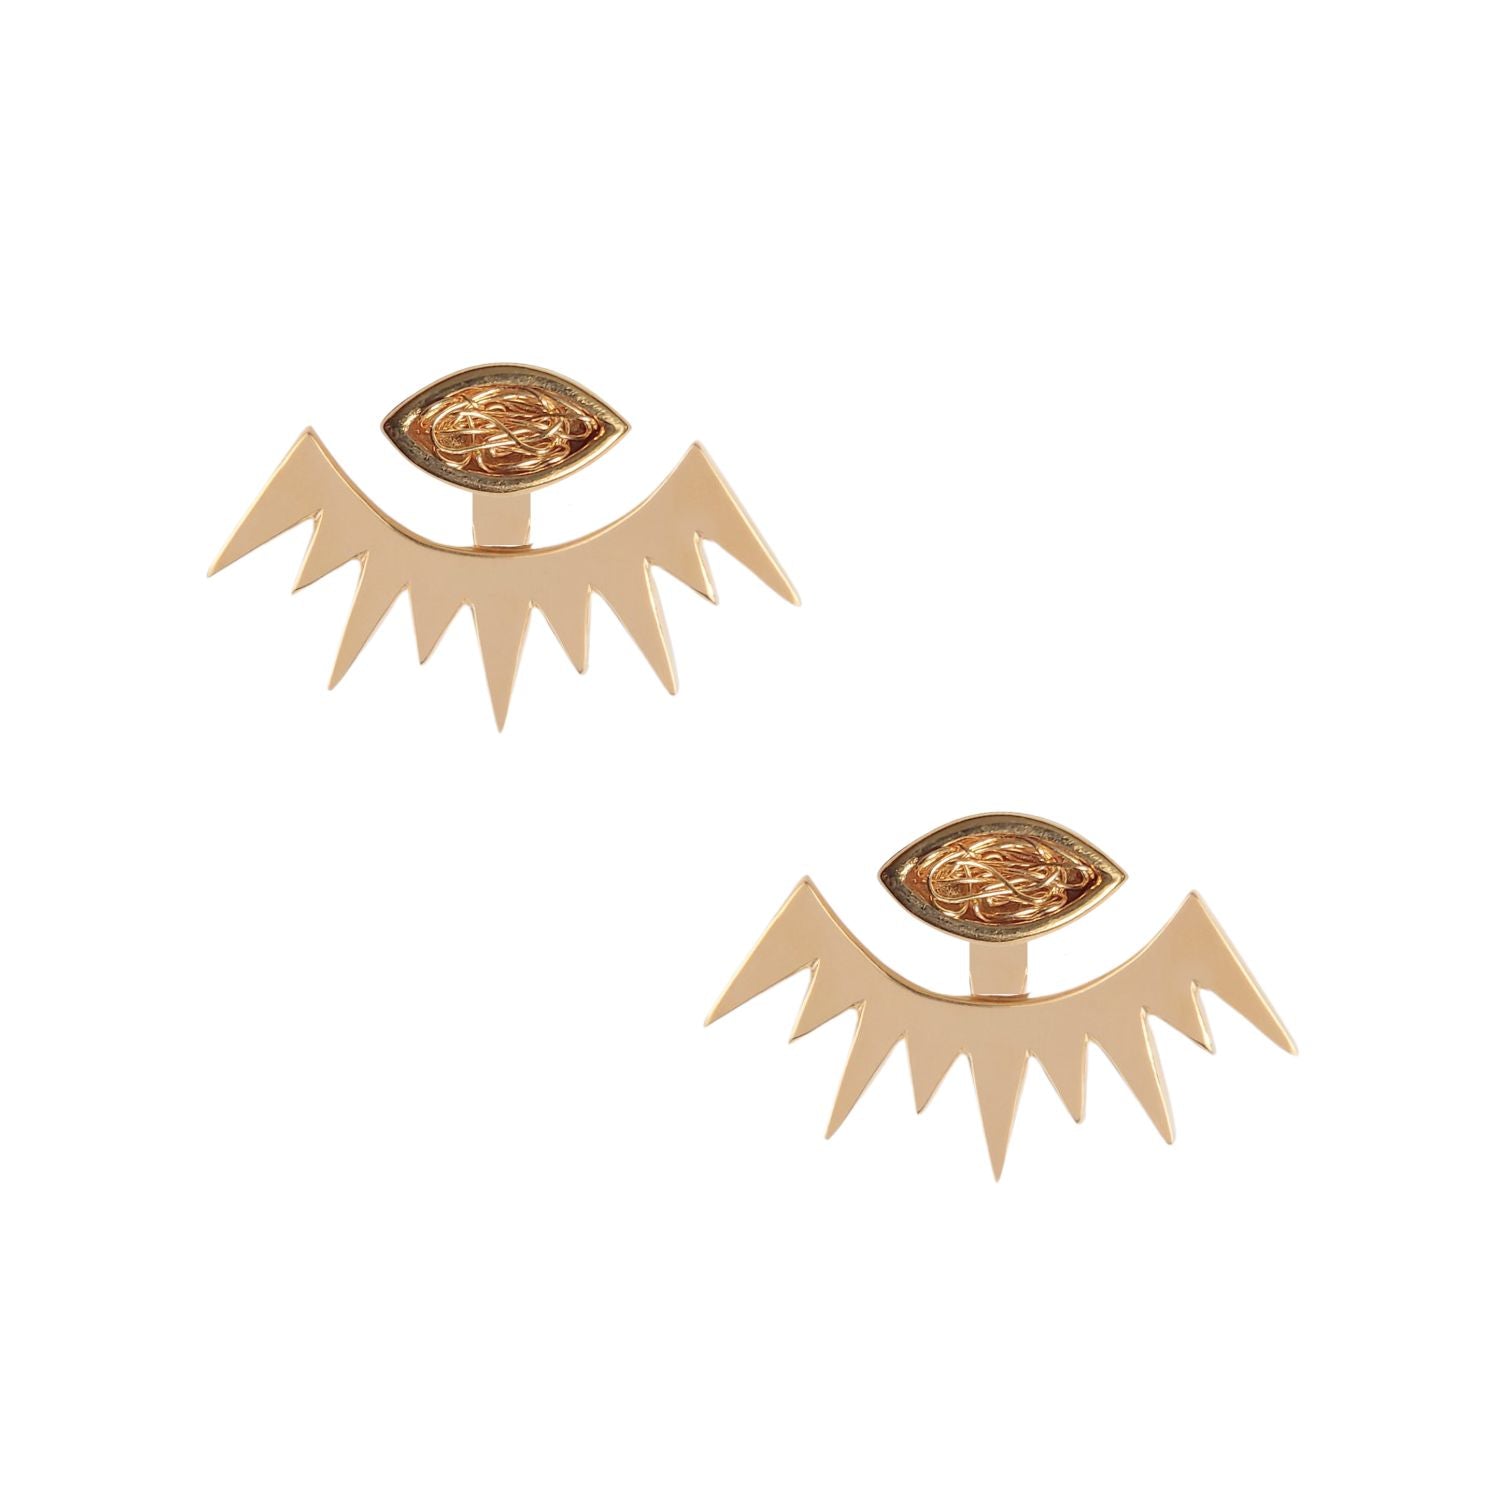 Stylish stud earrings paired with detachable ear jackets for a dynamic and unique fashion ensemble.